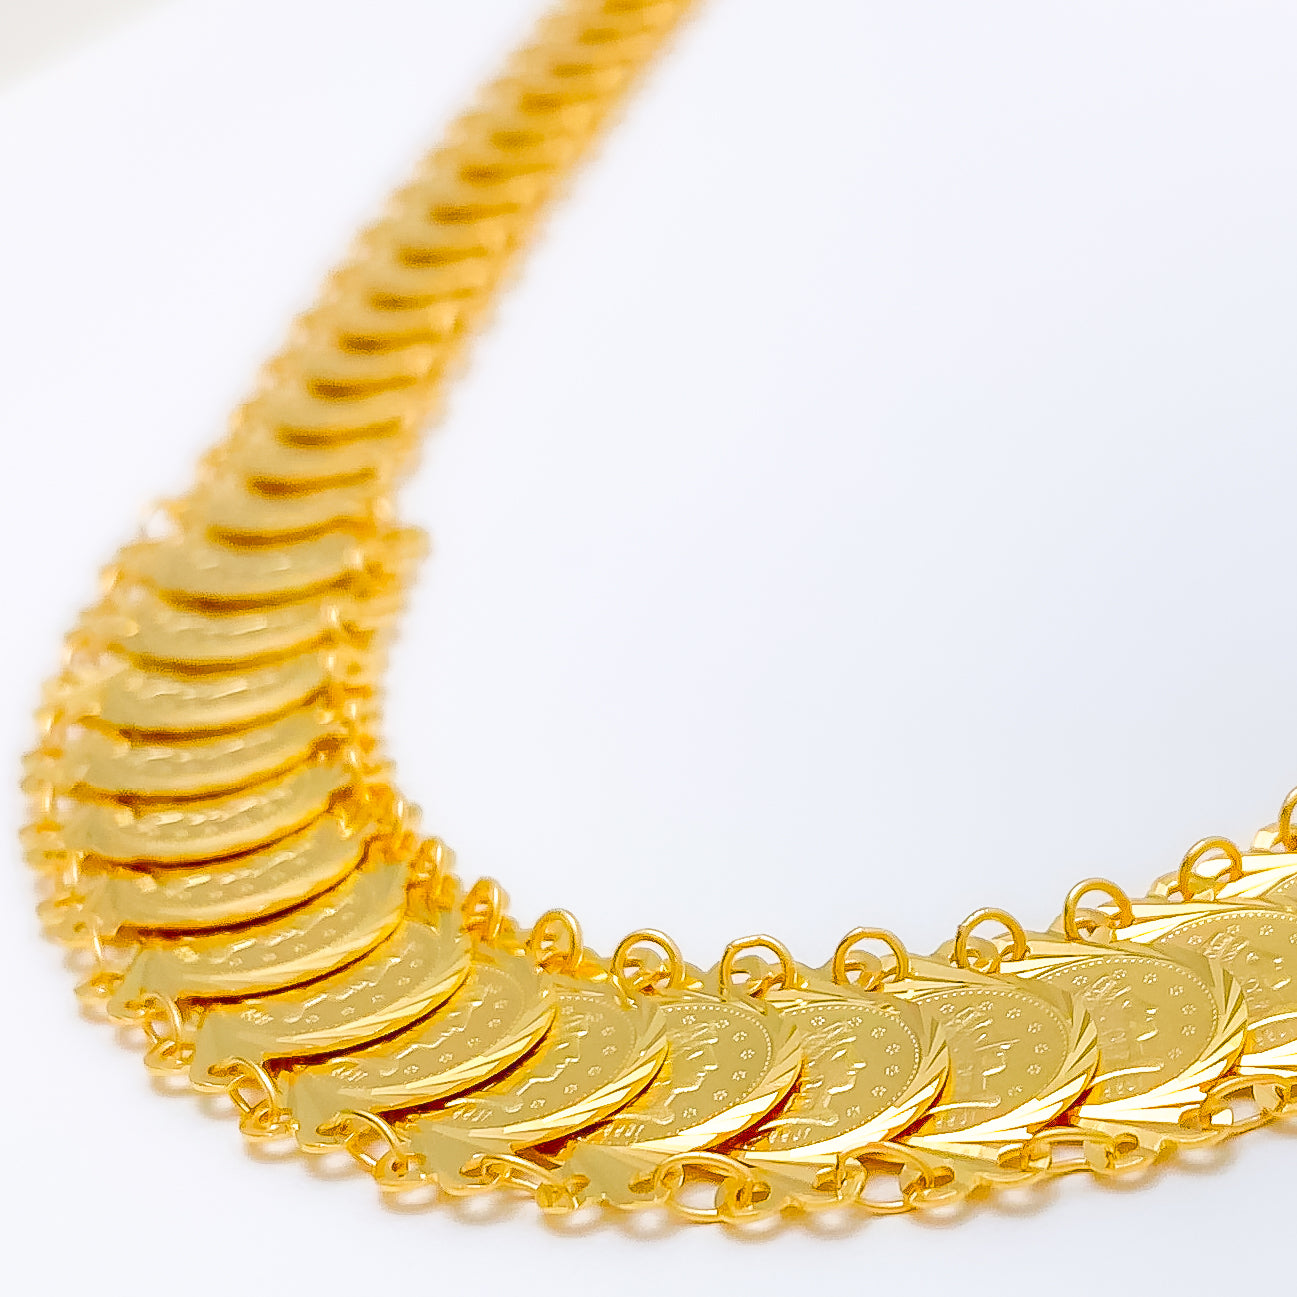 Elongated Oval Paved Diamond Chain Necklace with Small Gold Oval Plate–  Blacy's Vault